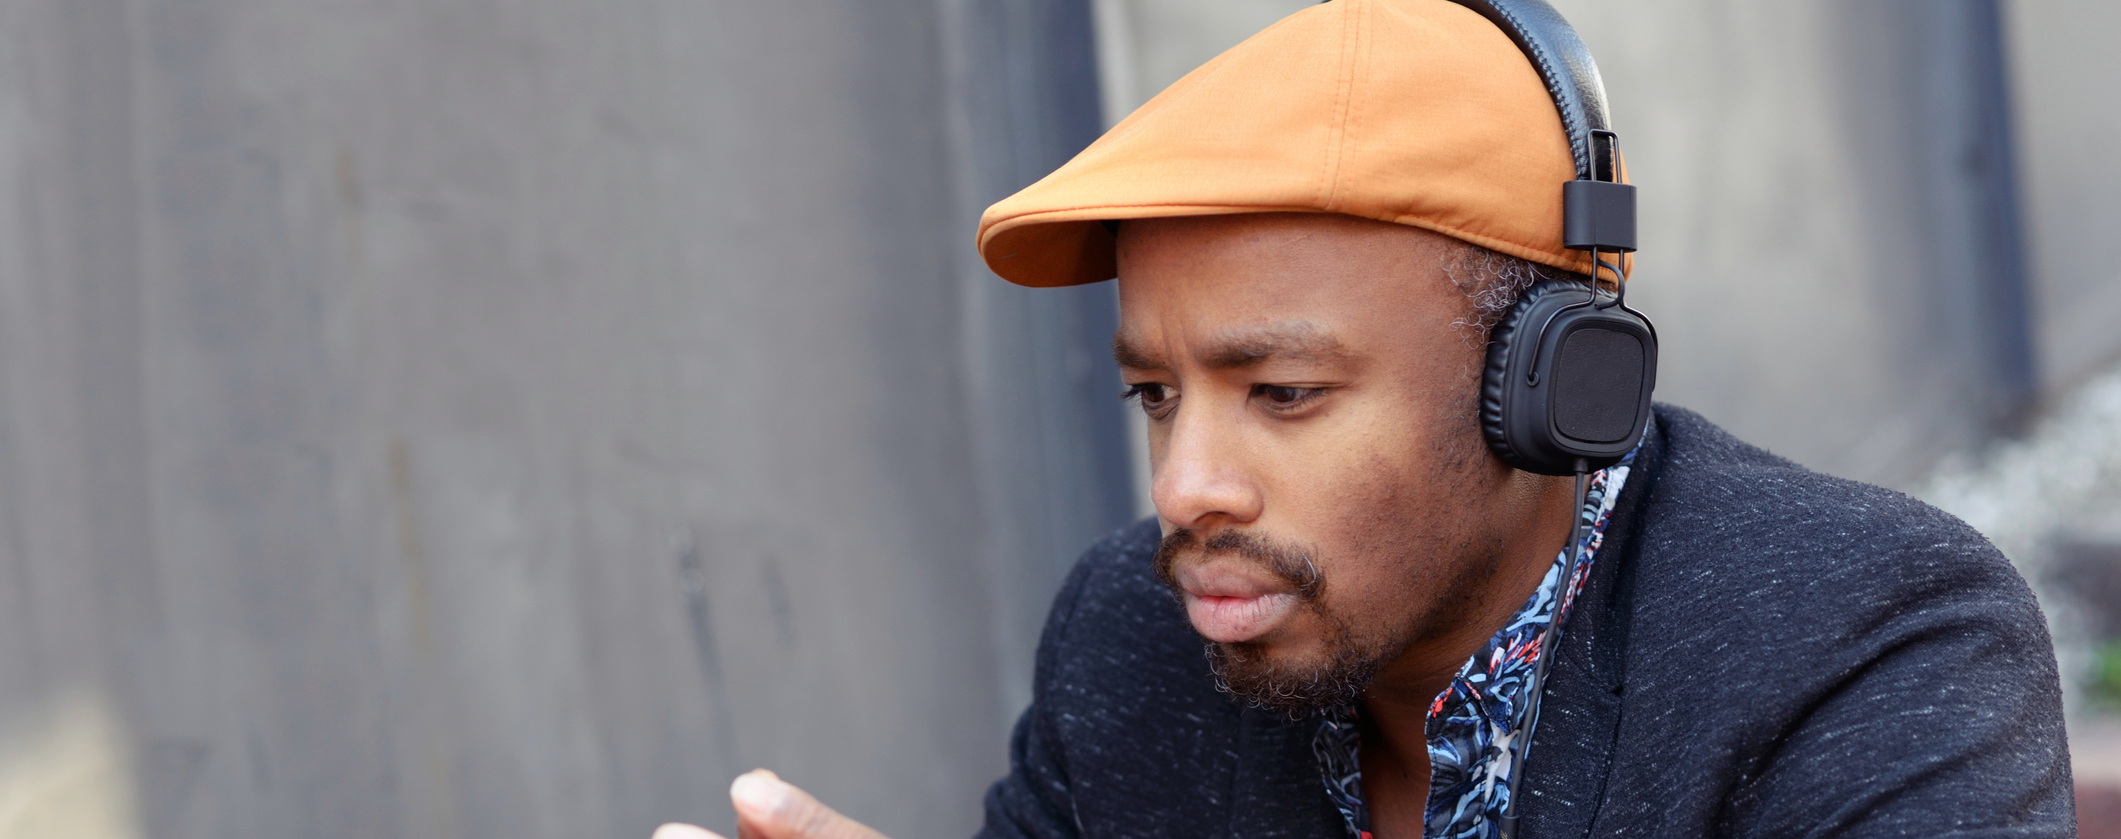 Black man in orange driving cap with black over the ear headphones looking down deep in thought